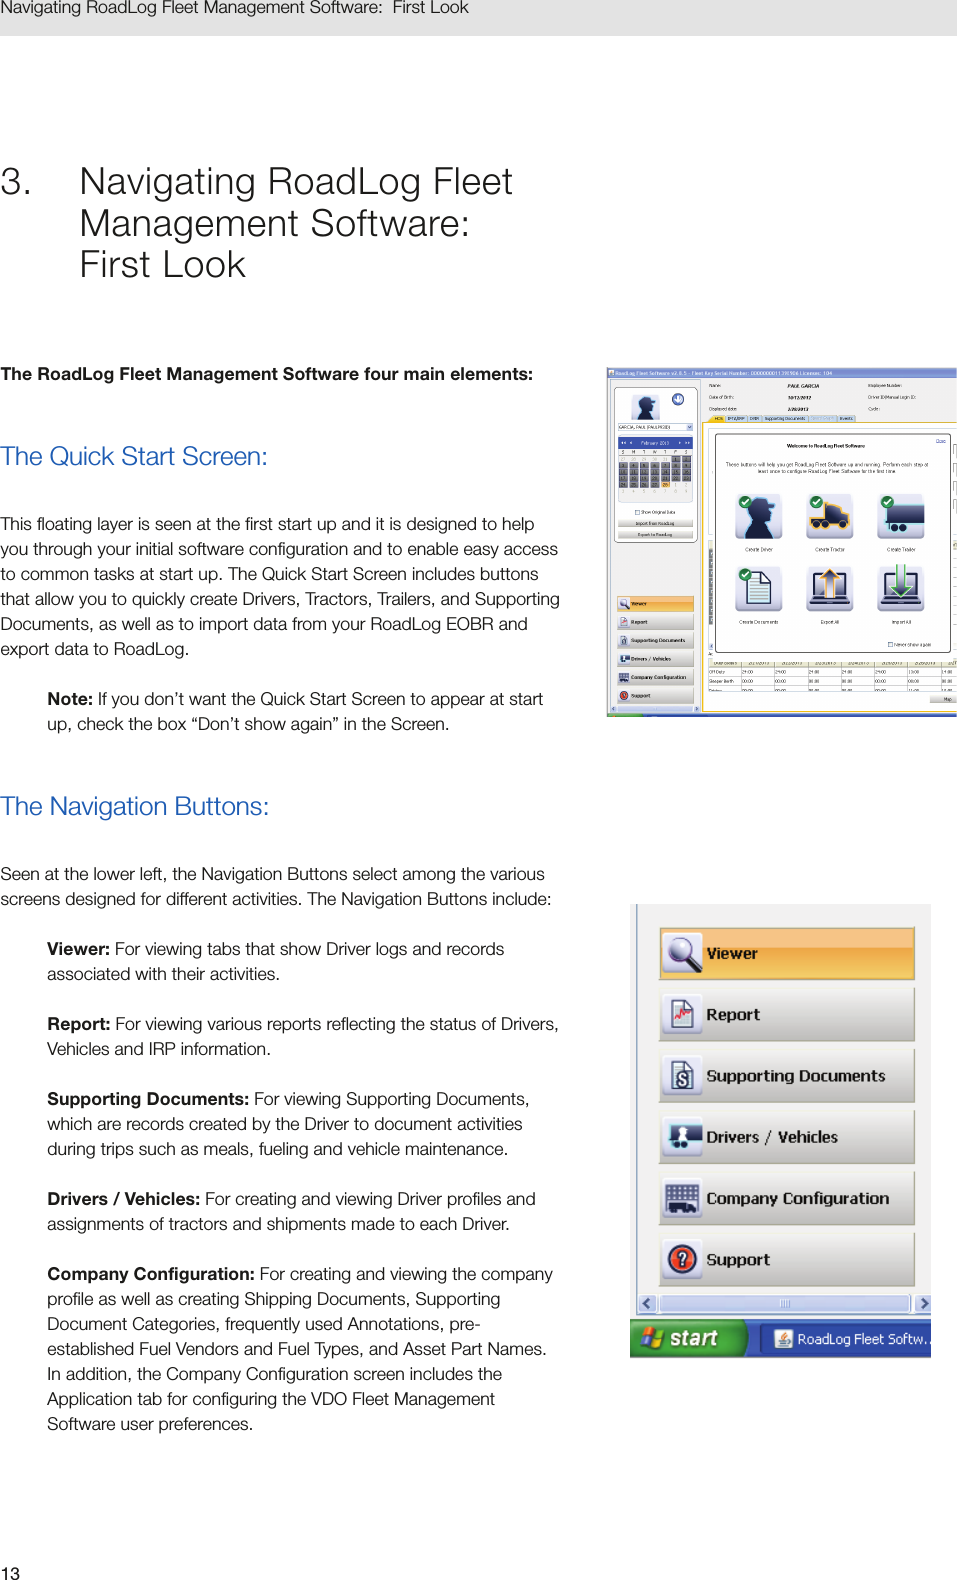 13Navigating RoadLog Fleet Management Software:  First Look3.  Navigating RoadLog Fleet Management Software:  First LookThe RoadLog Fleet Management Software four main elements: The Quick Start Screen: This floating layer is seen at the first start up and it is designed to help you through your initial software configuration and to enable easy access to common tasks at start up. The Quick Start Screen includes buttons that allow you to quickly create Drivers, Tractors, Trailers, and Supporting Documents, as well as to import data from your RoadLog EOBR and export data to RoadLog. Note: If you don’t want the Quick Start Screen to appear at start up, check the box “Don’t show again” in the Screen. The Navigation Buttons: Seen at the lower left, the Navigation Buttons select among the various screens designed for different activities. The Navigation Buttons include:Viewer: For viewing tabs that show Driver logs and records associated with their activities.Report: For viewing various reports reflecting the status of Drivers, Vehicles and IRP information.Supporting Documents: For viewing Supporting Documents, which are records created by the Driver to document activities during trips such as meals, fueling and vehicle maintenance.Drivers / Vehicles: For creating and viewing Driver profiles and assignments of tractors and shipments made to each Driver.Company Configuration: For creating and viewing the company profile as well as creating Shipping Documents, Supporting Document Categories, frequently used Annotations, pre-established Fuel Vendors and Fuel Types, and Asset Part Names. In addition, the Company Configuration screen includes the Application tab for configuring the VDO Fleet Management Software user preferences.